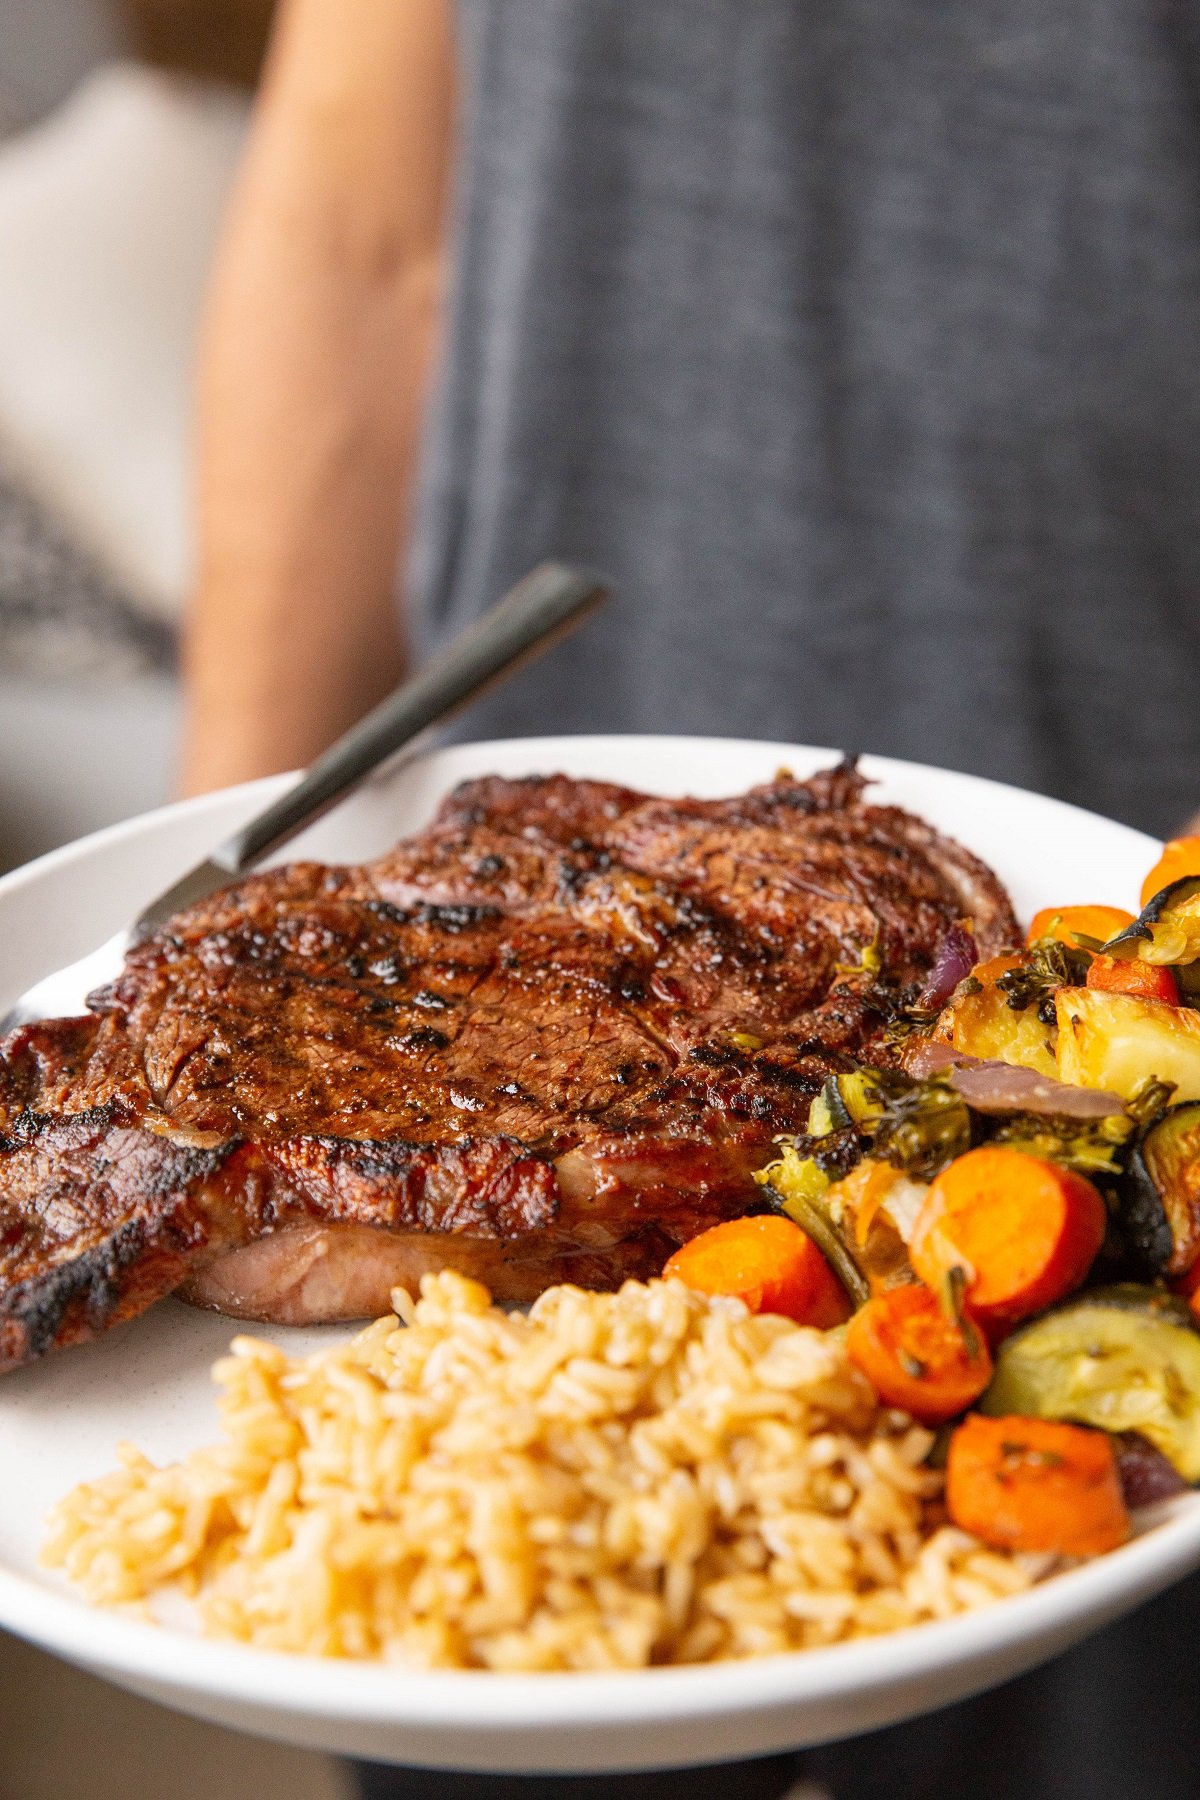 Man holding a plate of steak, rice, and vegetables.